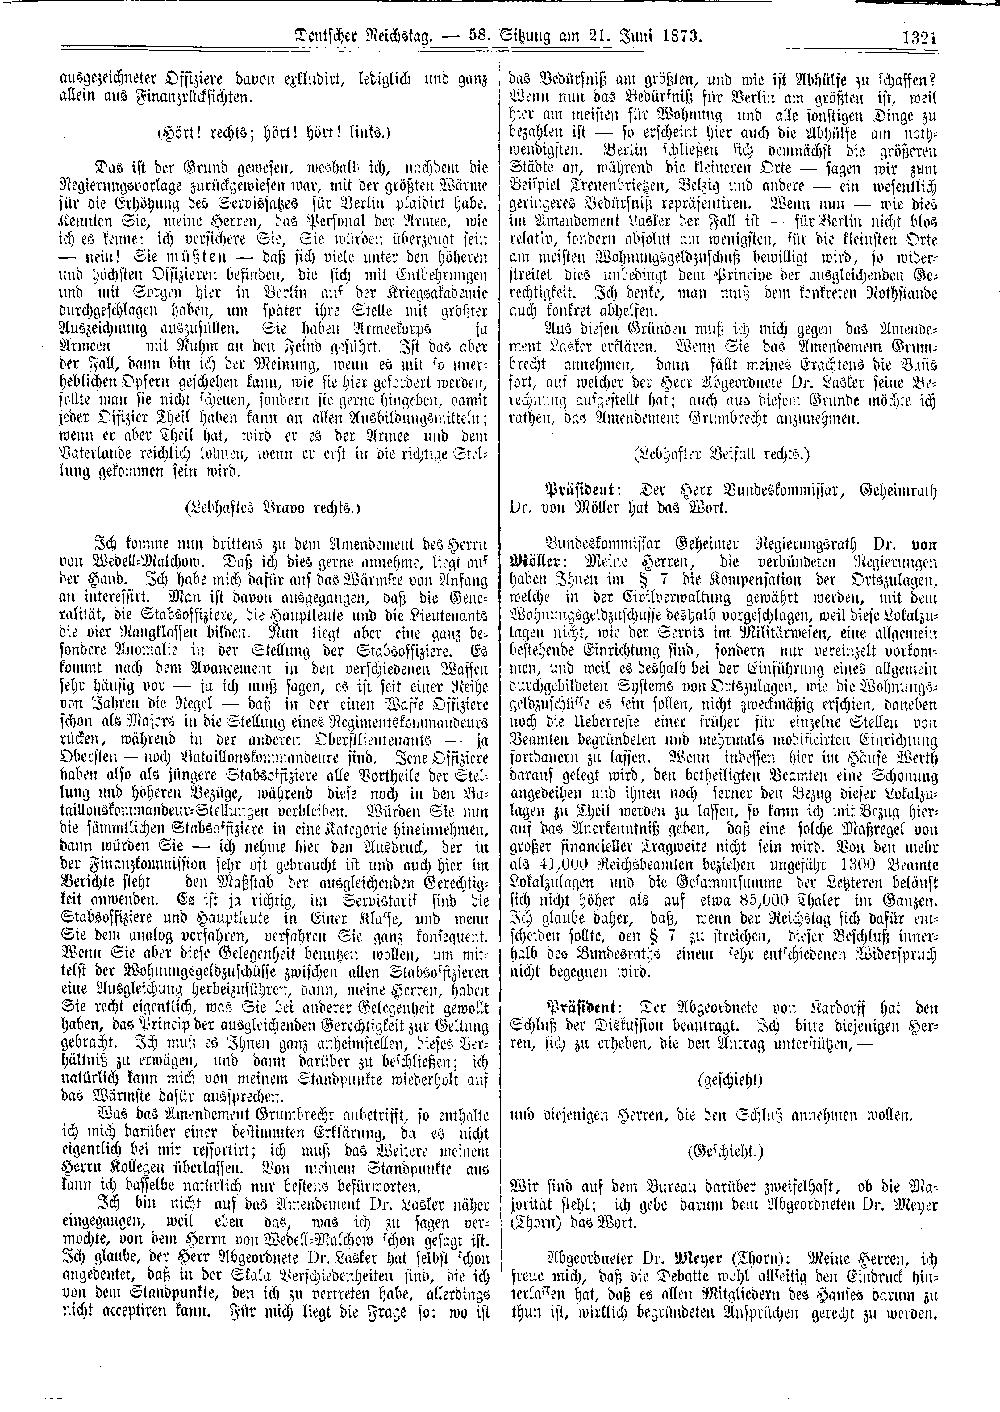 Scan of page 1321